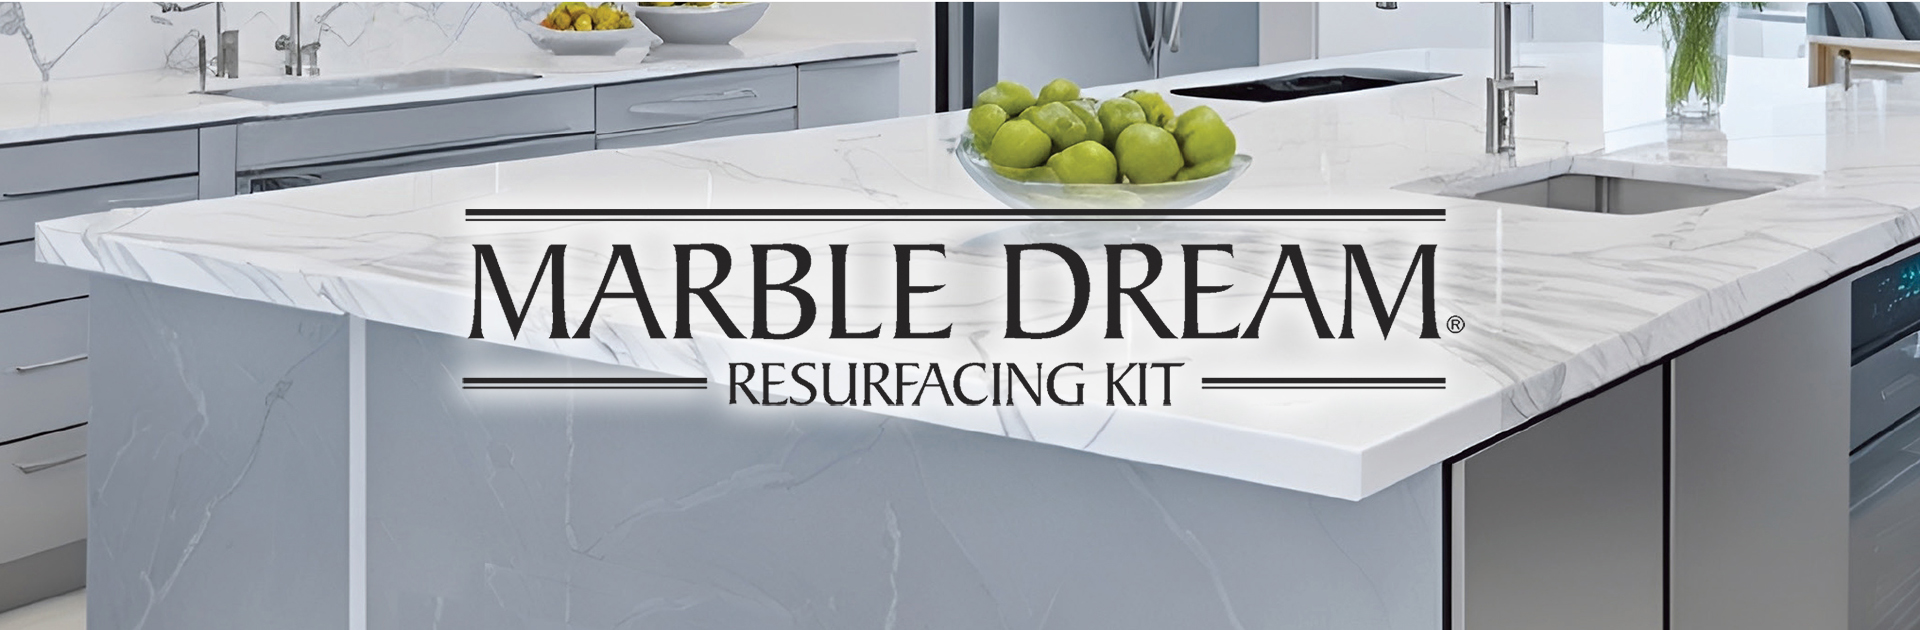 marble Dream Product page header